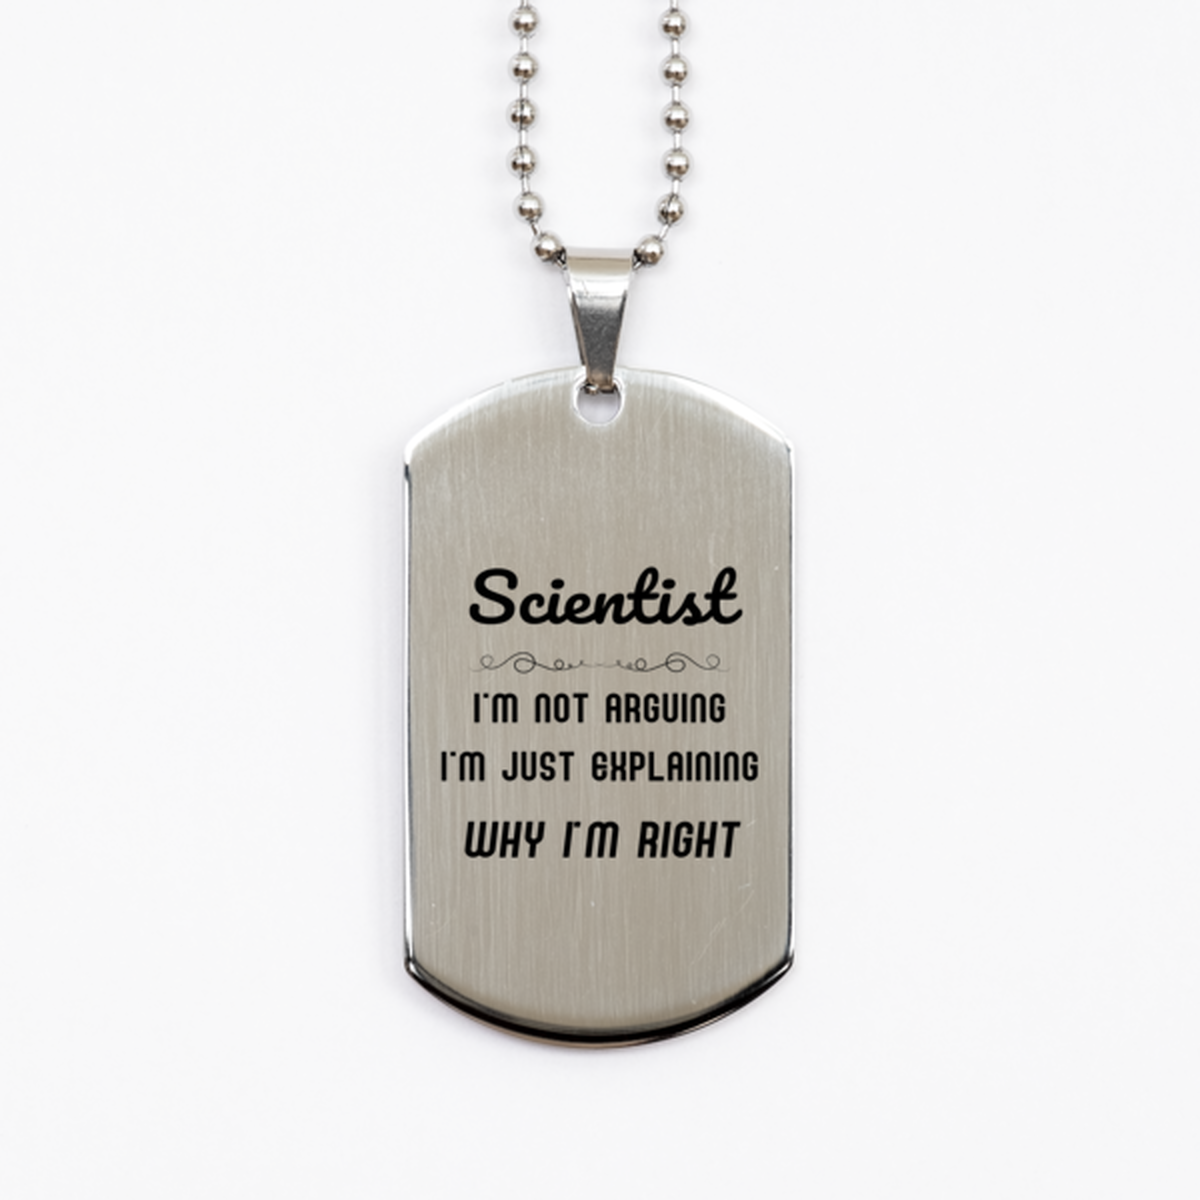 Scientist I'm not Arguing. I'm Just Explaining Why I'm RIGHT Silver Dog Tag, Funny Saying Quote Scientist Gifts For Scientist Graduation Birthday Christmas Gifts for Men Women Coworker